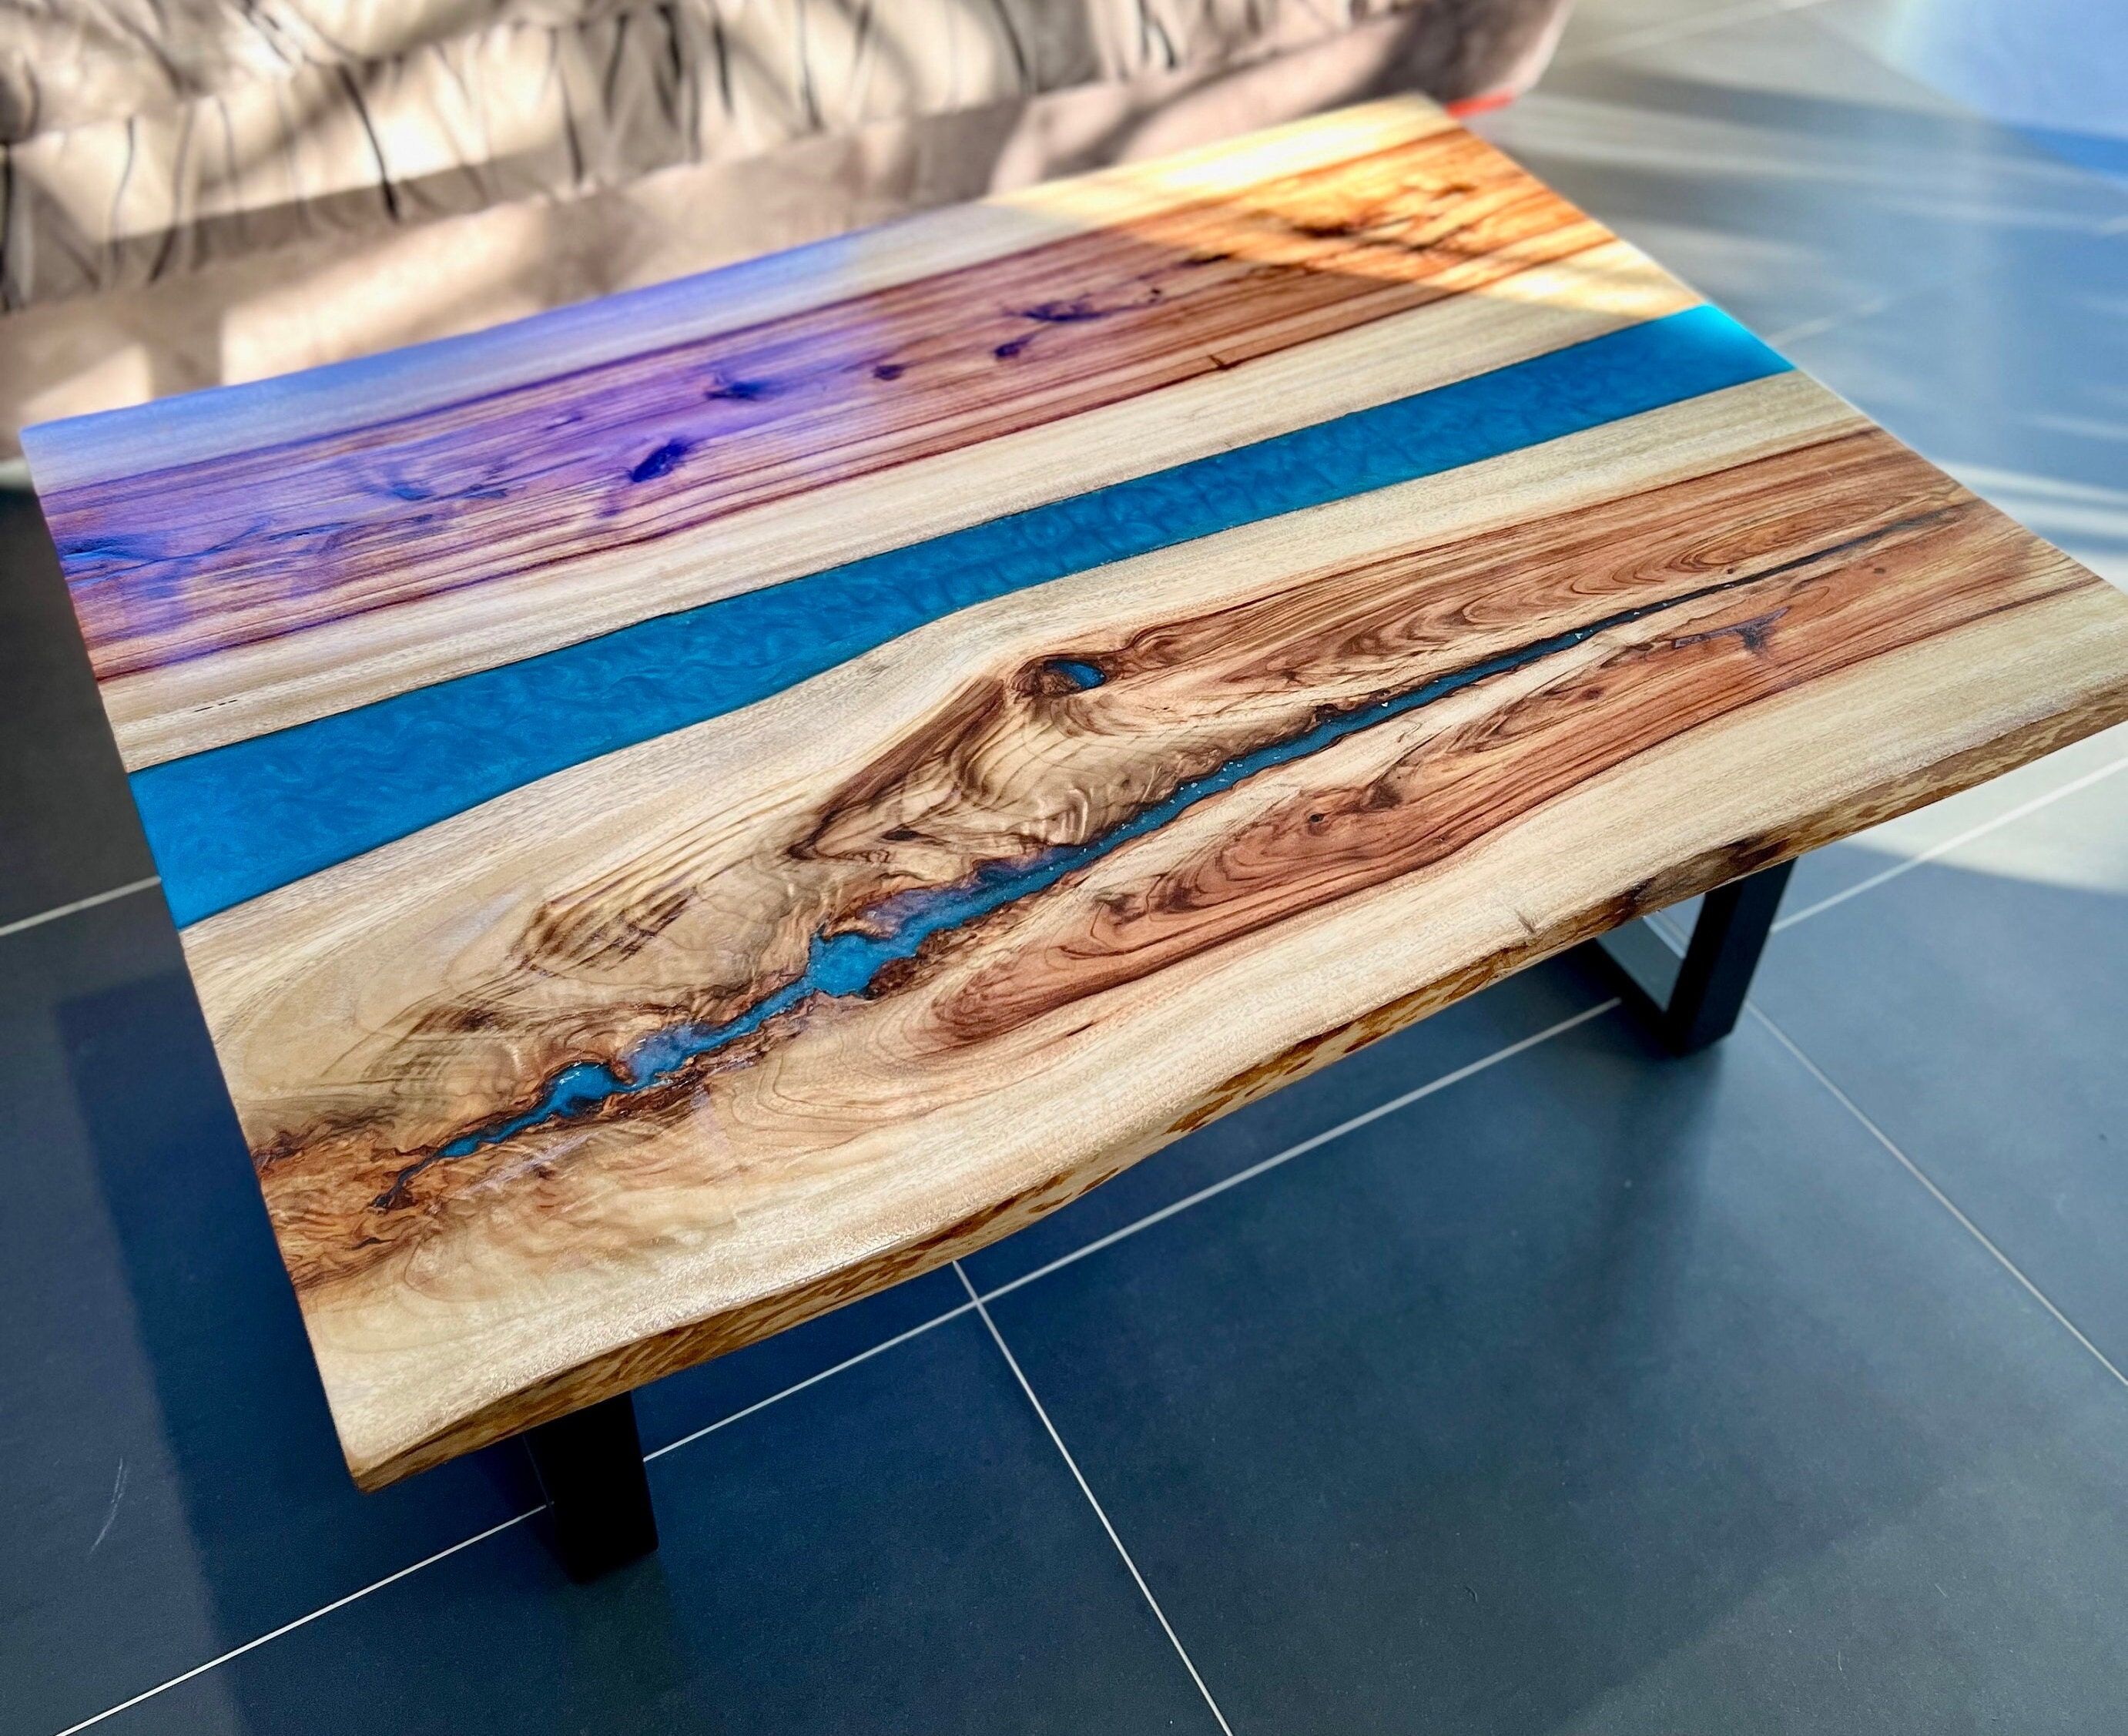 Black Resin Table, Epoxy Dining Table, Epoxy Resin Table, Custom 56” x 36”  Walnut Table, Black Epoxy River Dining Table for Troy